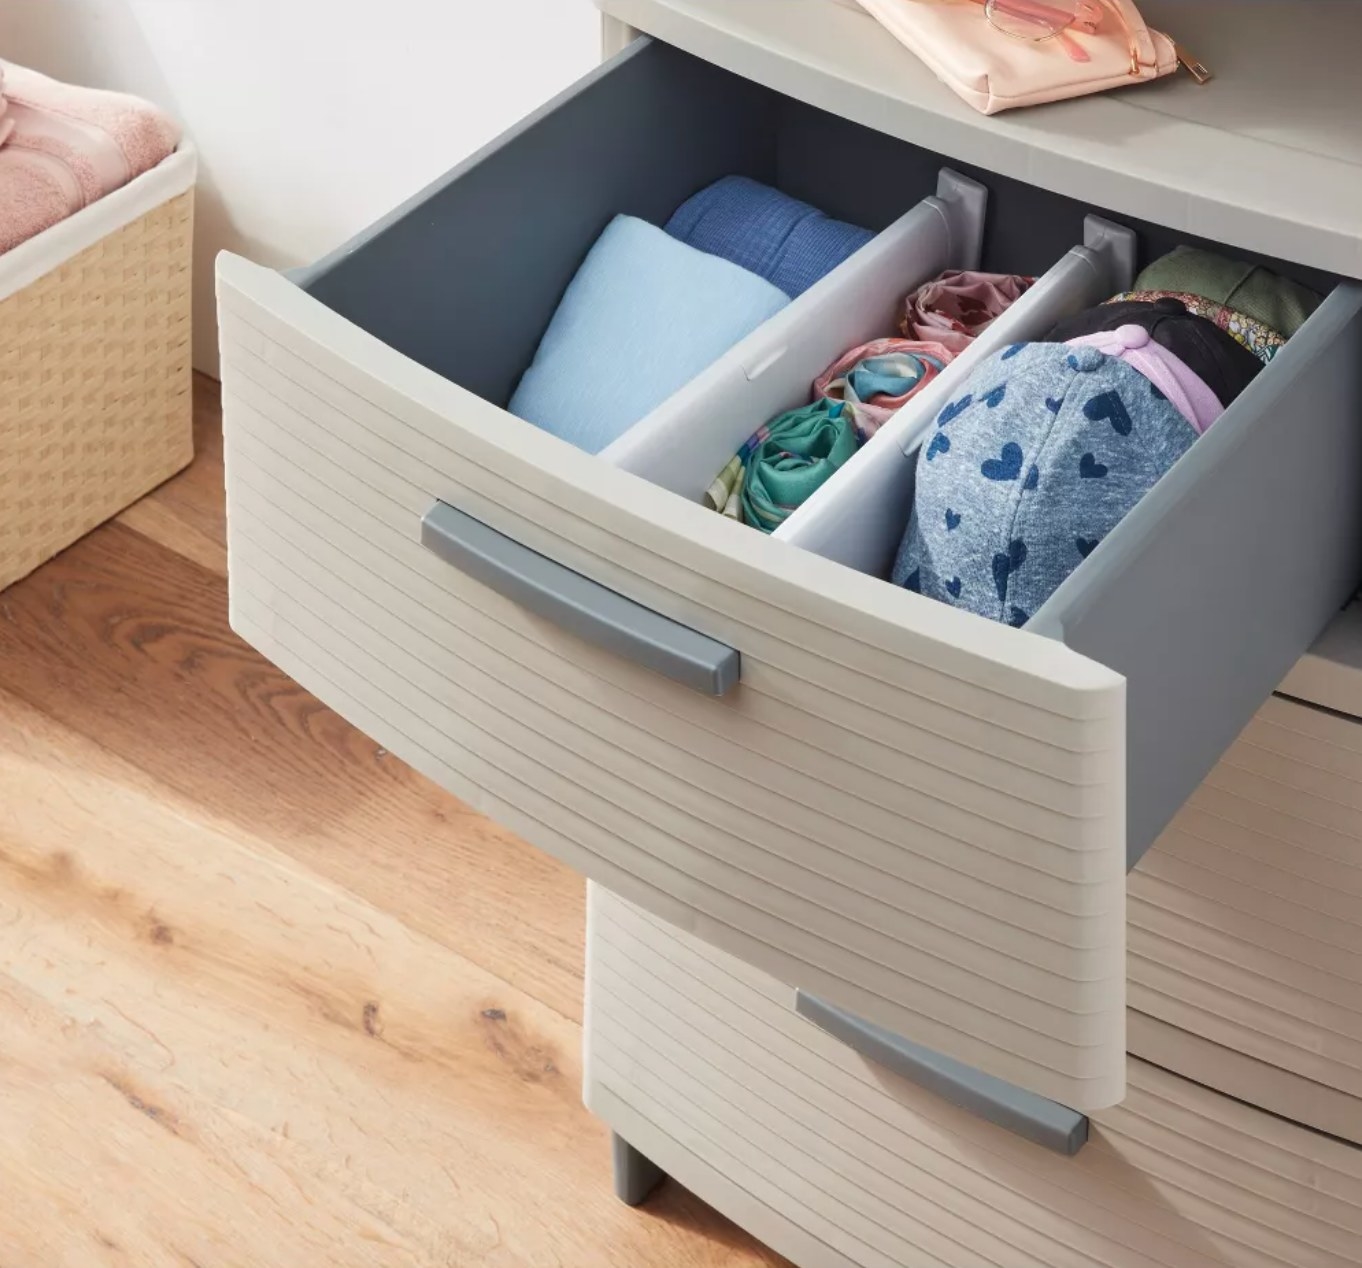 the white plastic dividers in a grey dresser, separating clothes and hats